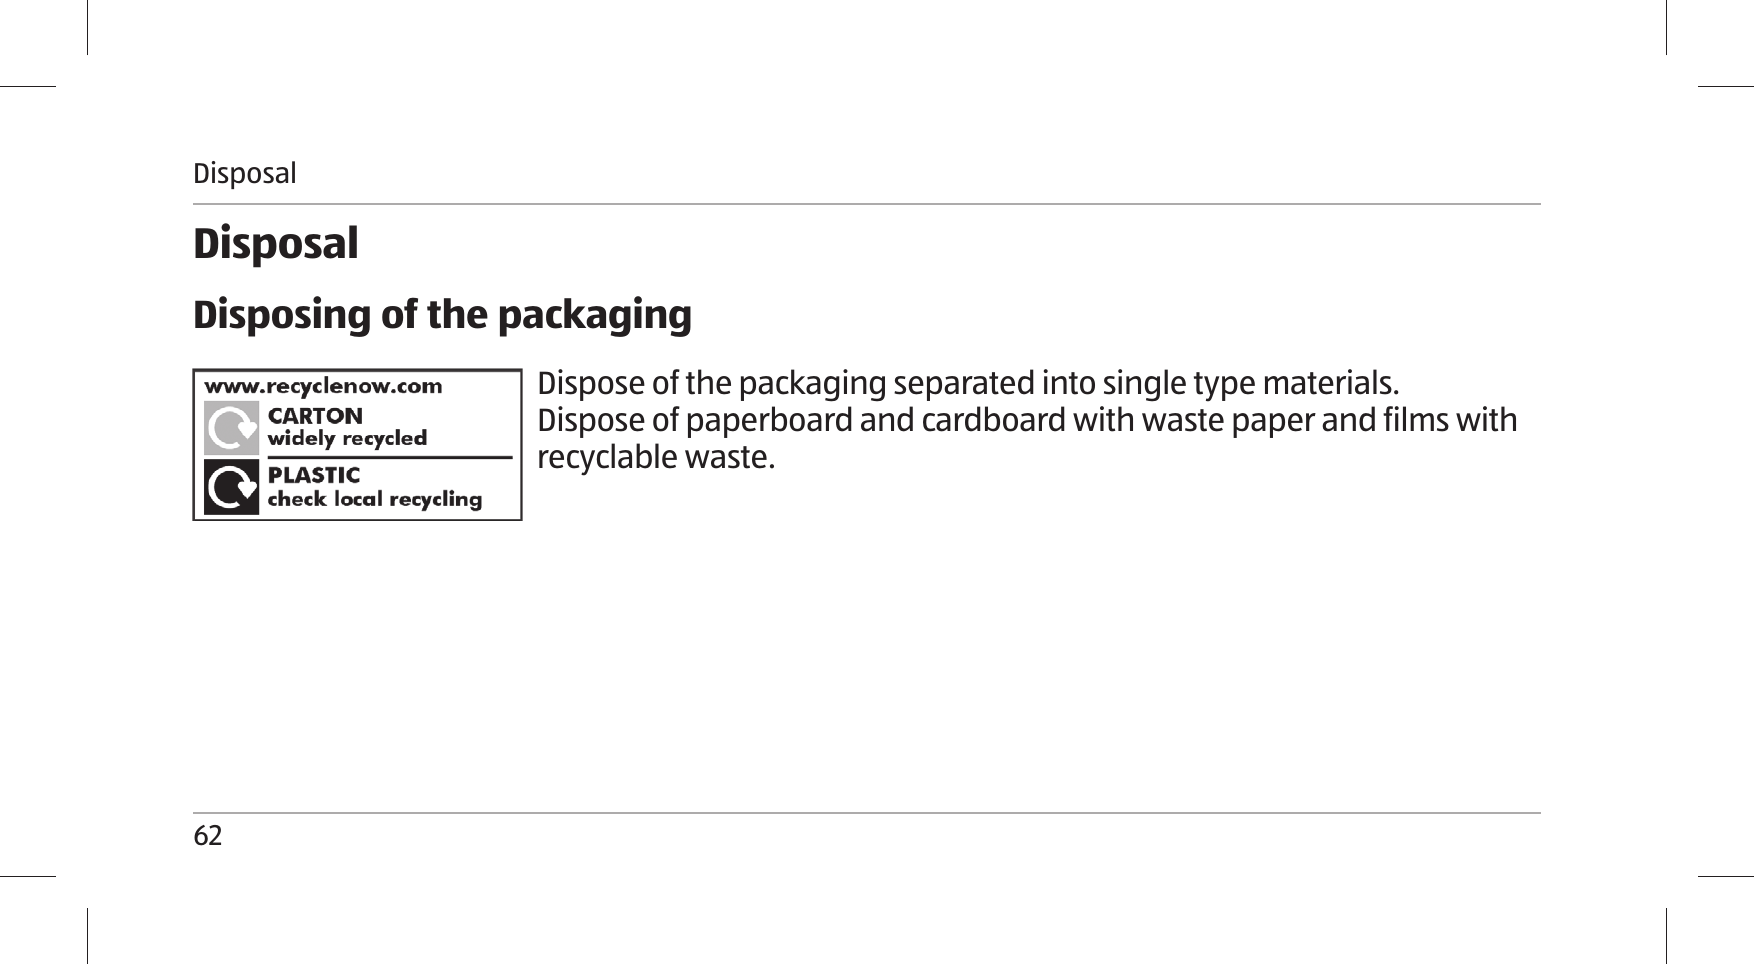 Disposal62DisposalDisposing of the packagingDispose of the packaging separated into single type materials. Dispose of paperboard and cardboard with waste paper and films with recyclable waste.